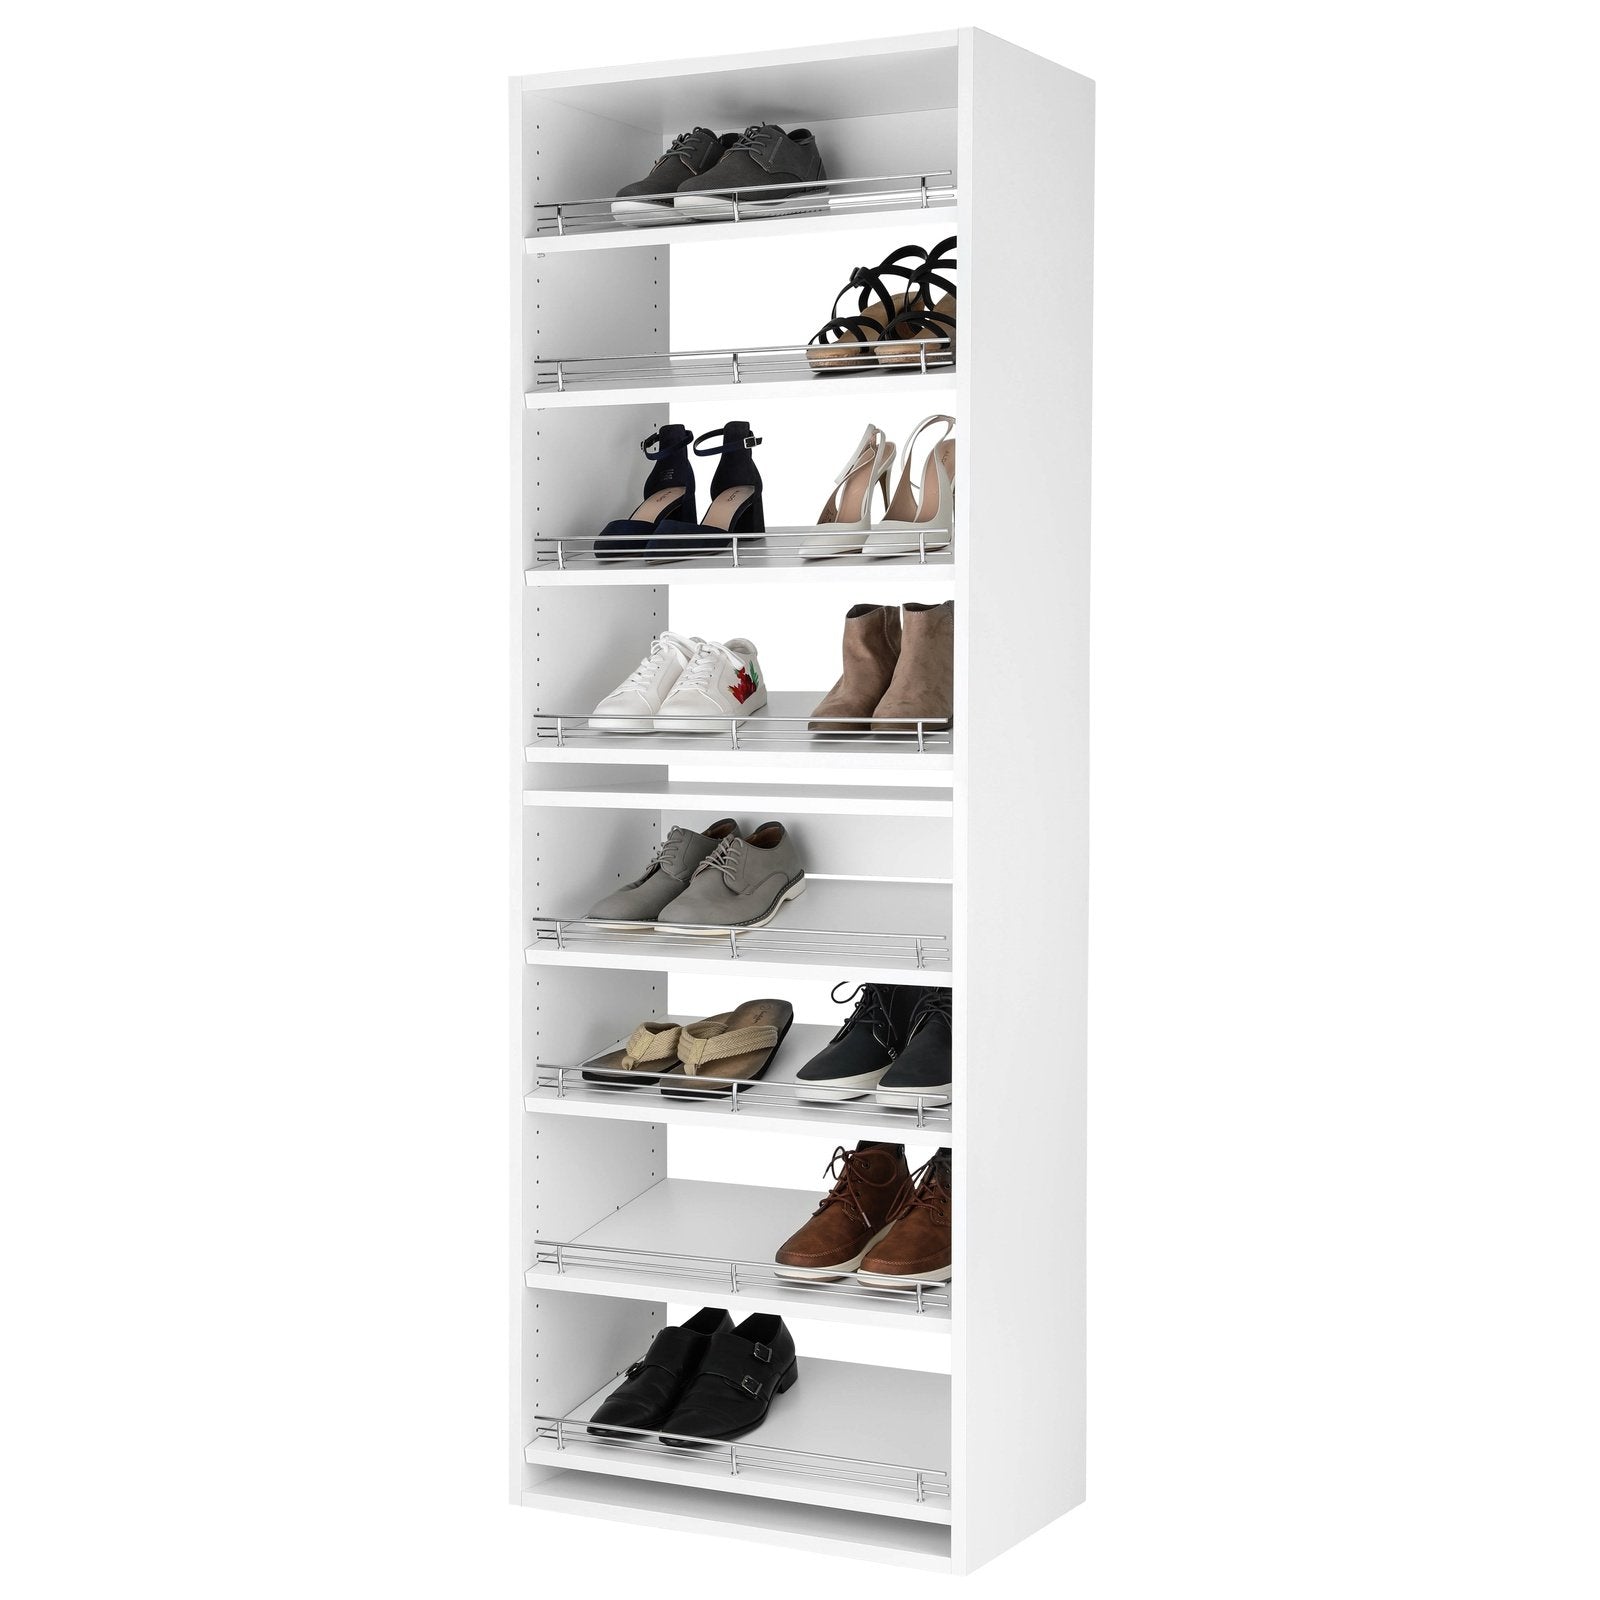 Three level angled shoe rack - Fits 6 -8 pairs of shoes